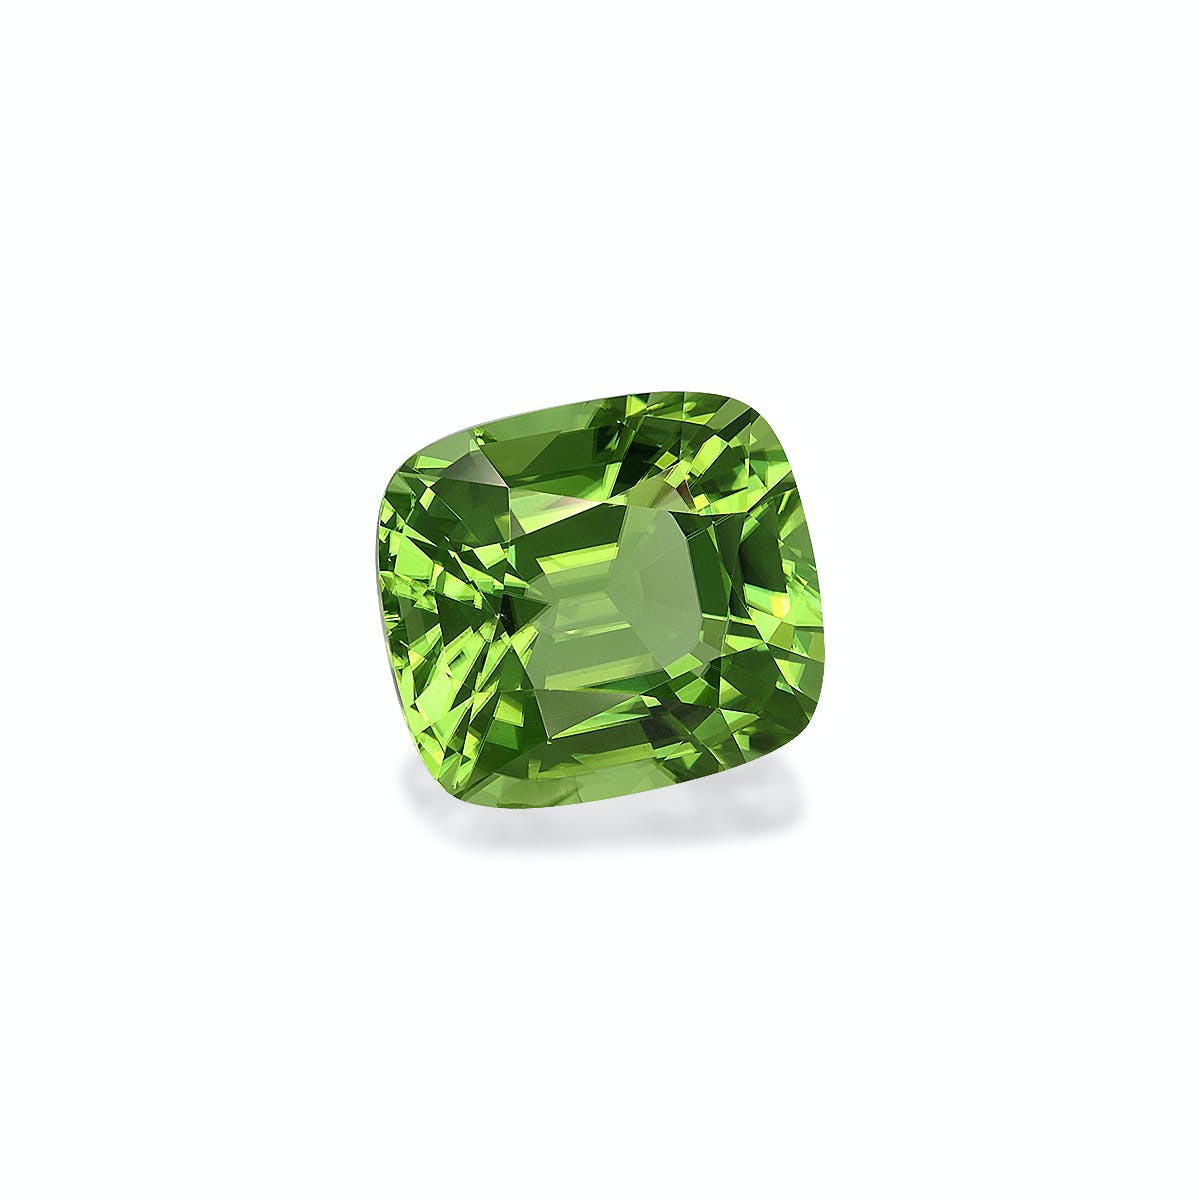 Picture of Vivid Green Peridot 20.45ct - 17x15mm (PD0335)